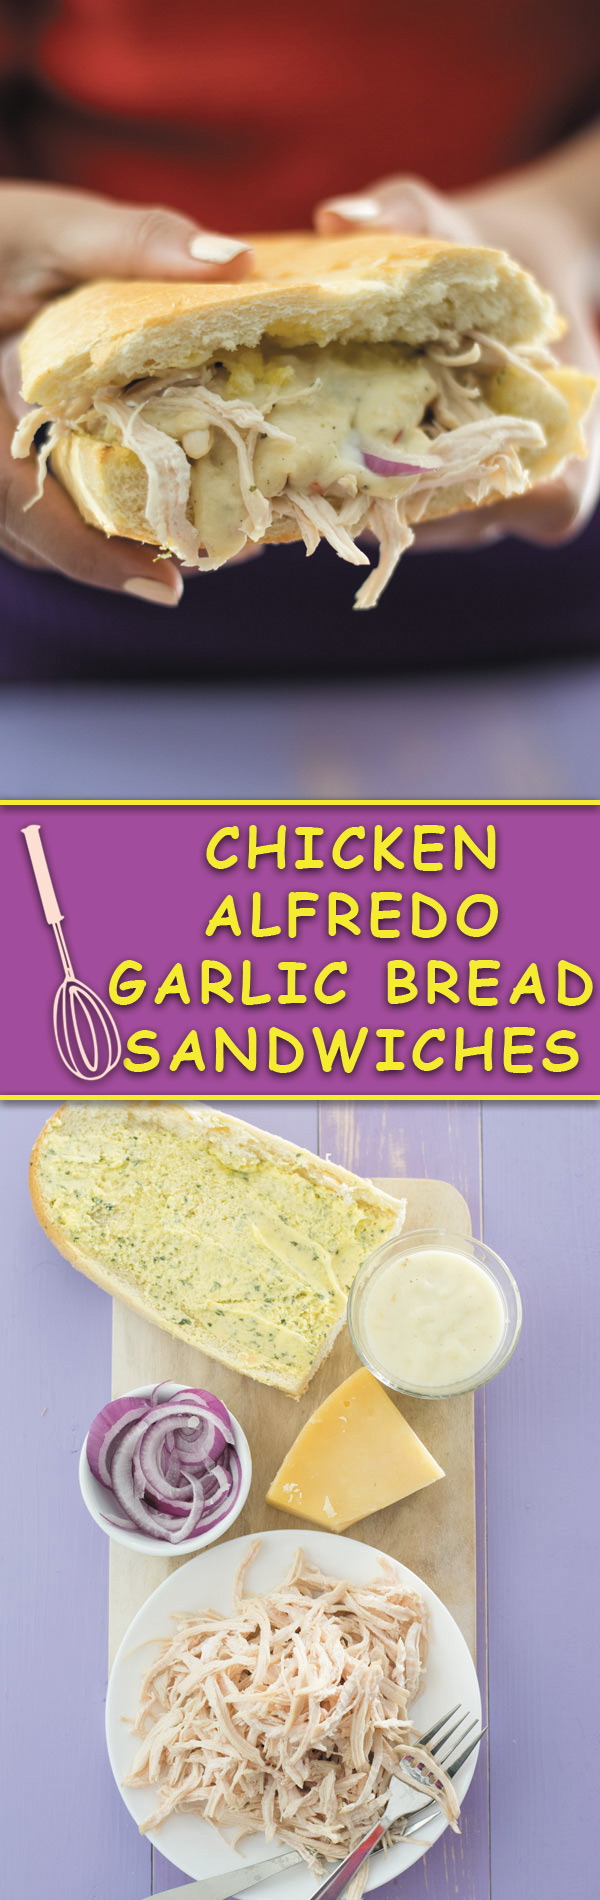 Chicken Alfredo Garlic Bread Sandwiches - super easy weeknight meal BUT with tons of flavor! Shredded chicken, alfredo sauce, parmesan cheese and garlic bread makes for a mean addicting sandwich!